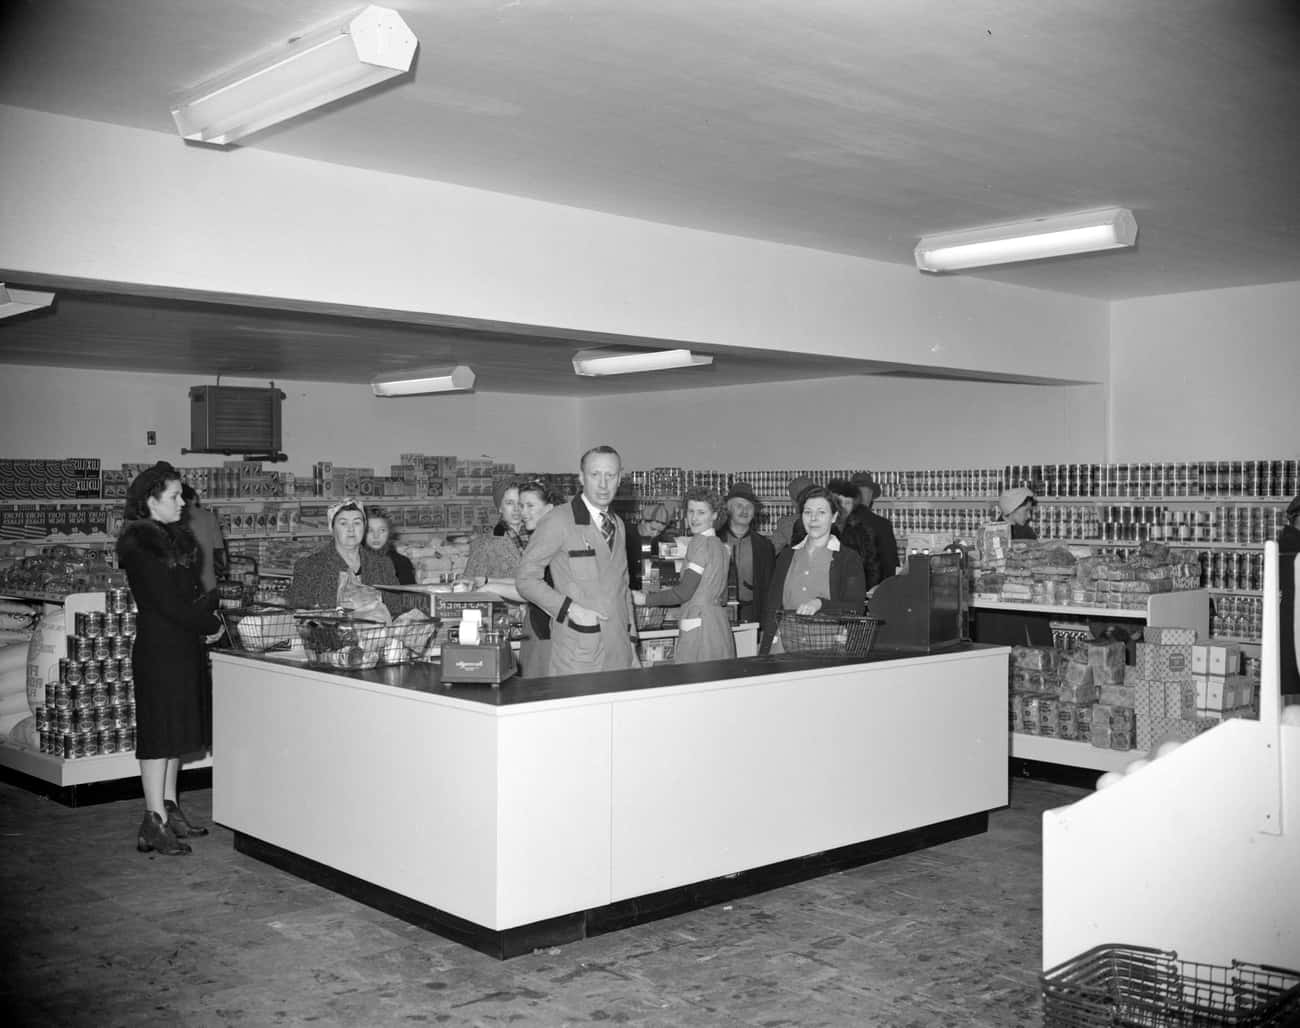 A Grocery Store In Vancouver, 1940s